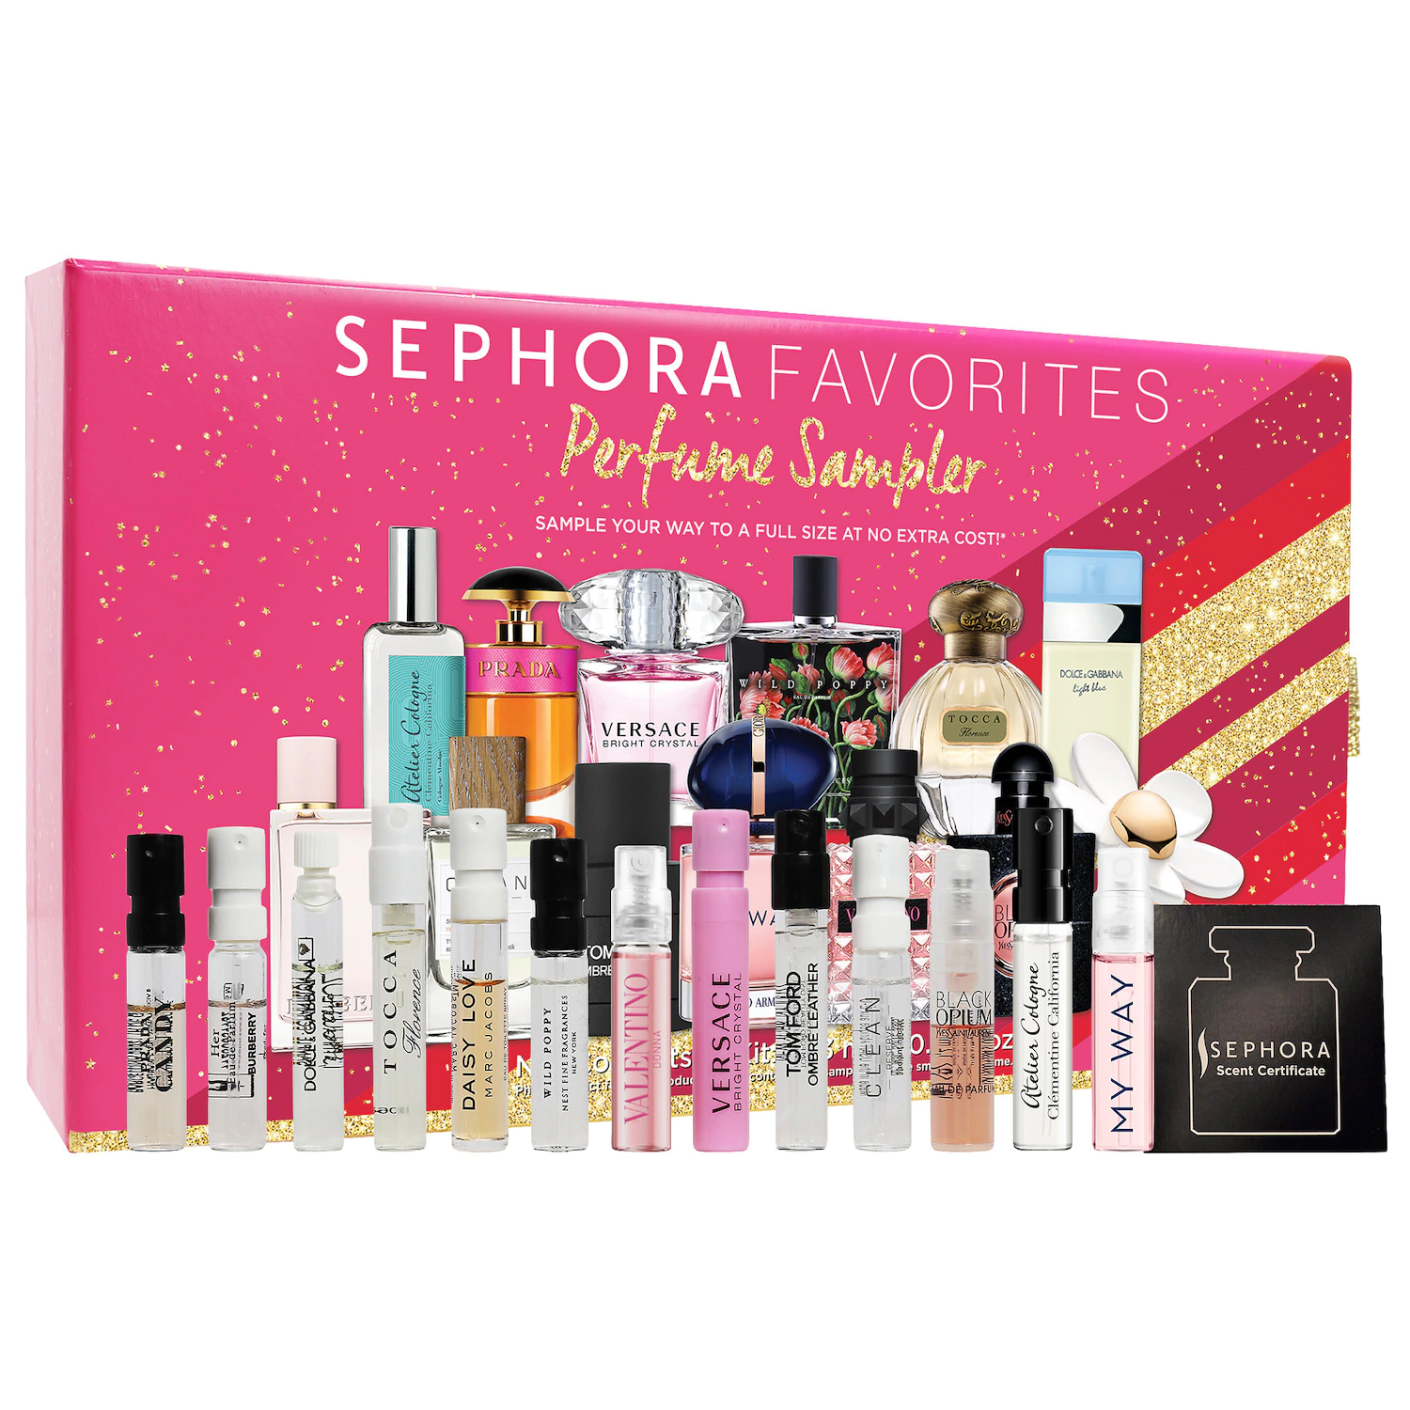 Sephora Favorites Holiday Perfume Sampler Set Available Now + Coupons